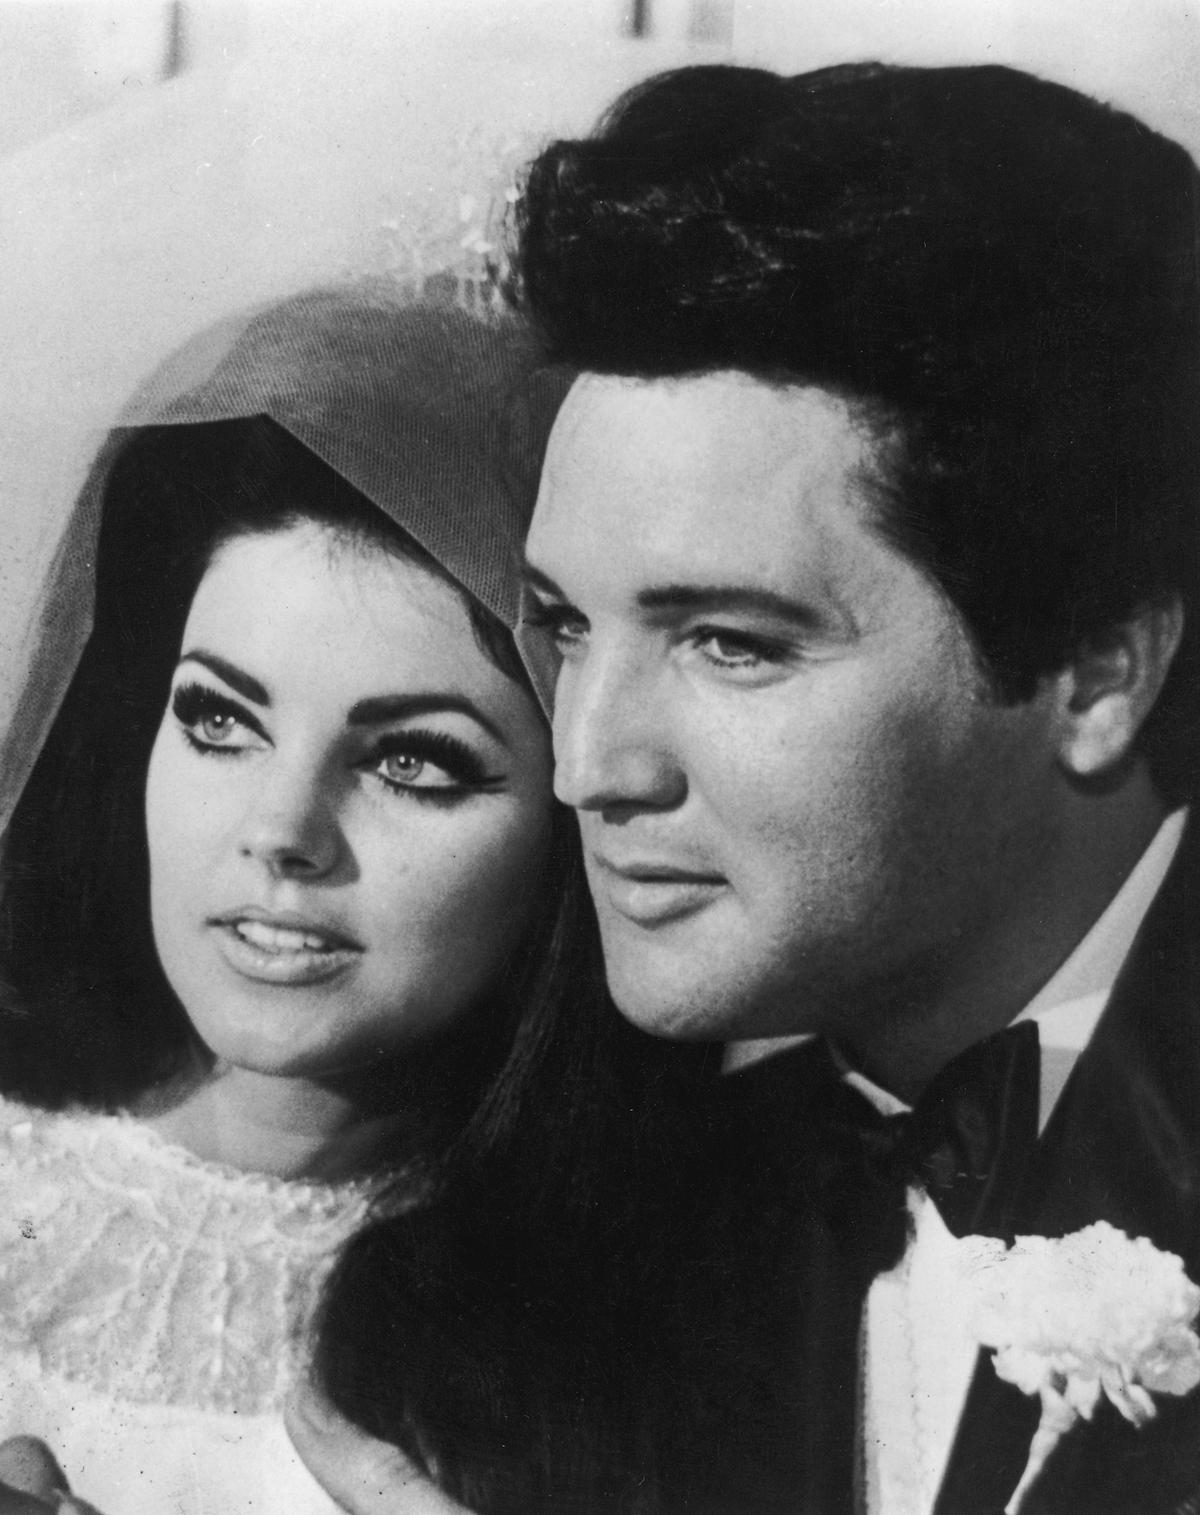 Elvis Presley with his bride, Priscilla Beaulieu, after their wedding in Las Vegas on May 1, 1967 (©Getty Images | <a href="https://www.gettyimages.com/detail/news-photo/american-rock-n-roll-singer-and-actor-elvis-presley-with-news-photo/3229262?adppopup=true">Keystone</a>)